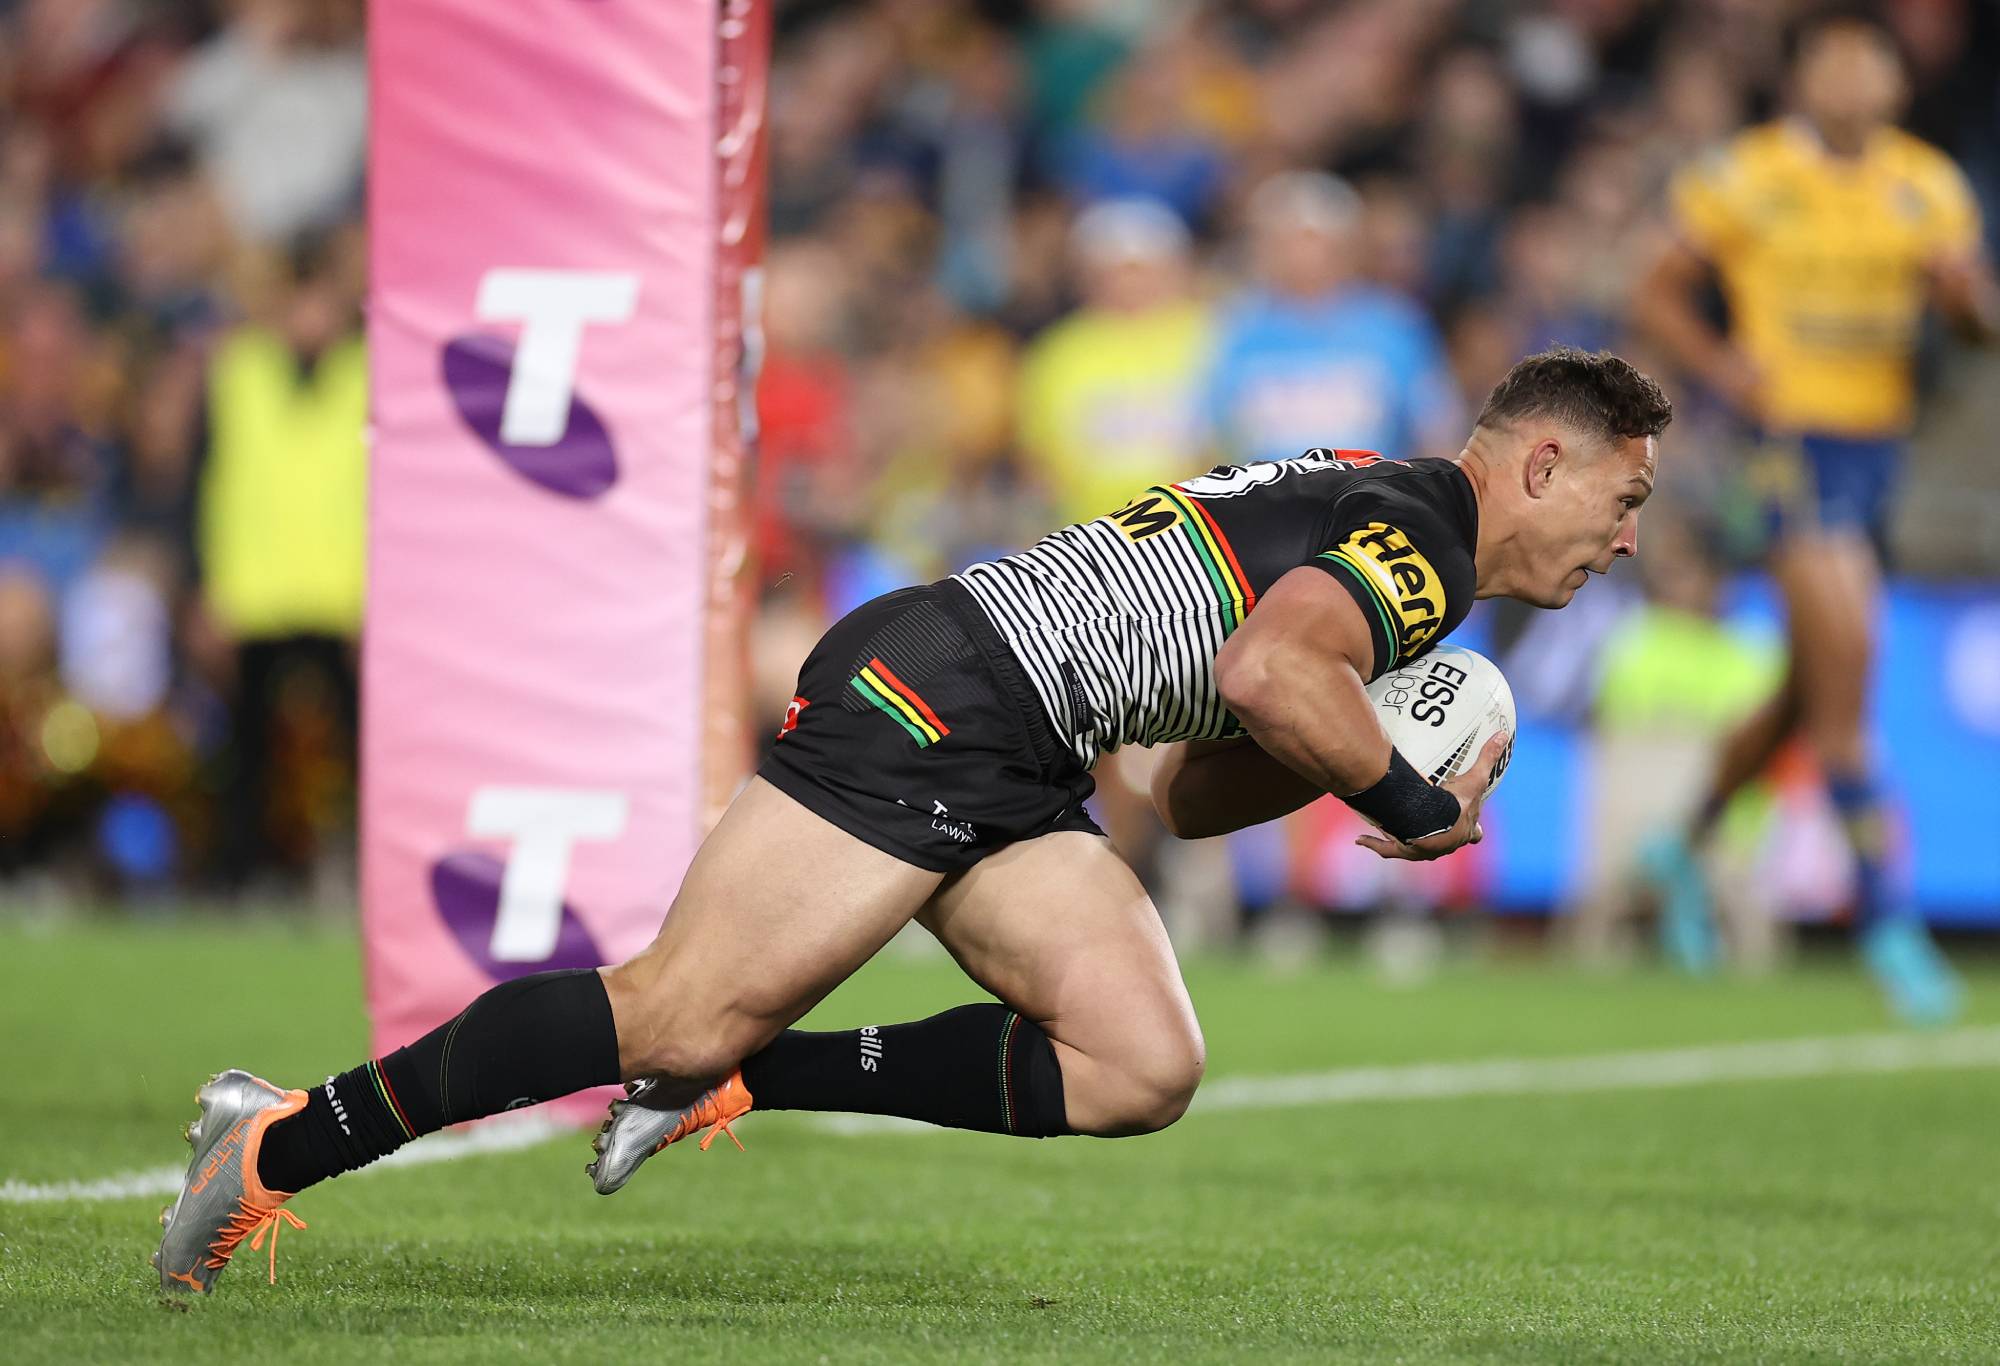 SYDNEY, AUSTRALIA - OCTOBER 02: Scott Sorensen of the Panthers scores a try during the 2022 NRL Grand Final match between the Penrith Panthers and the Parramatta Eels at Accor Stadium on October 02, 2022, in Sydney, Australia. (Photo by Cameron Spencer/Getty Images)